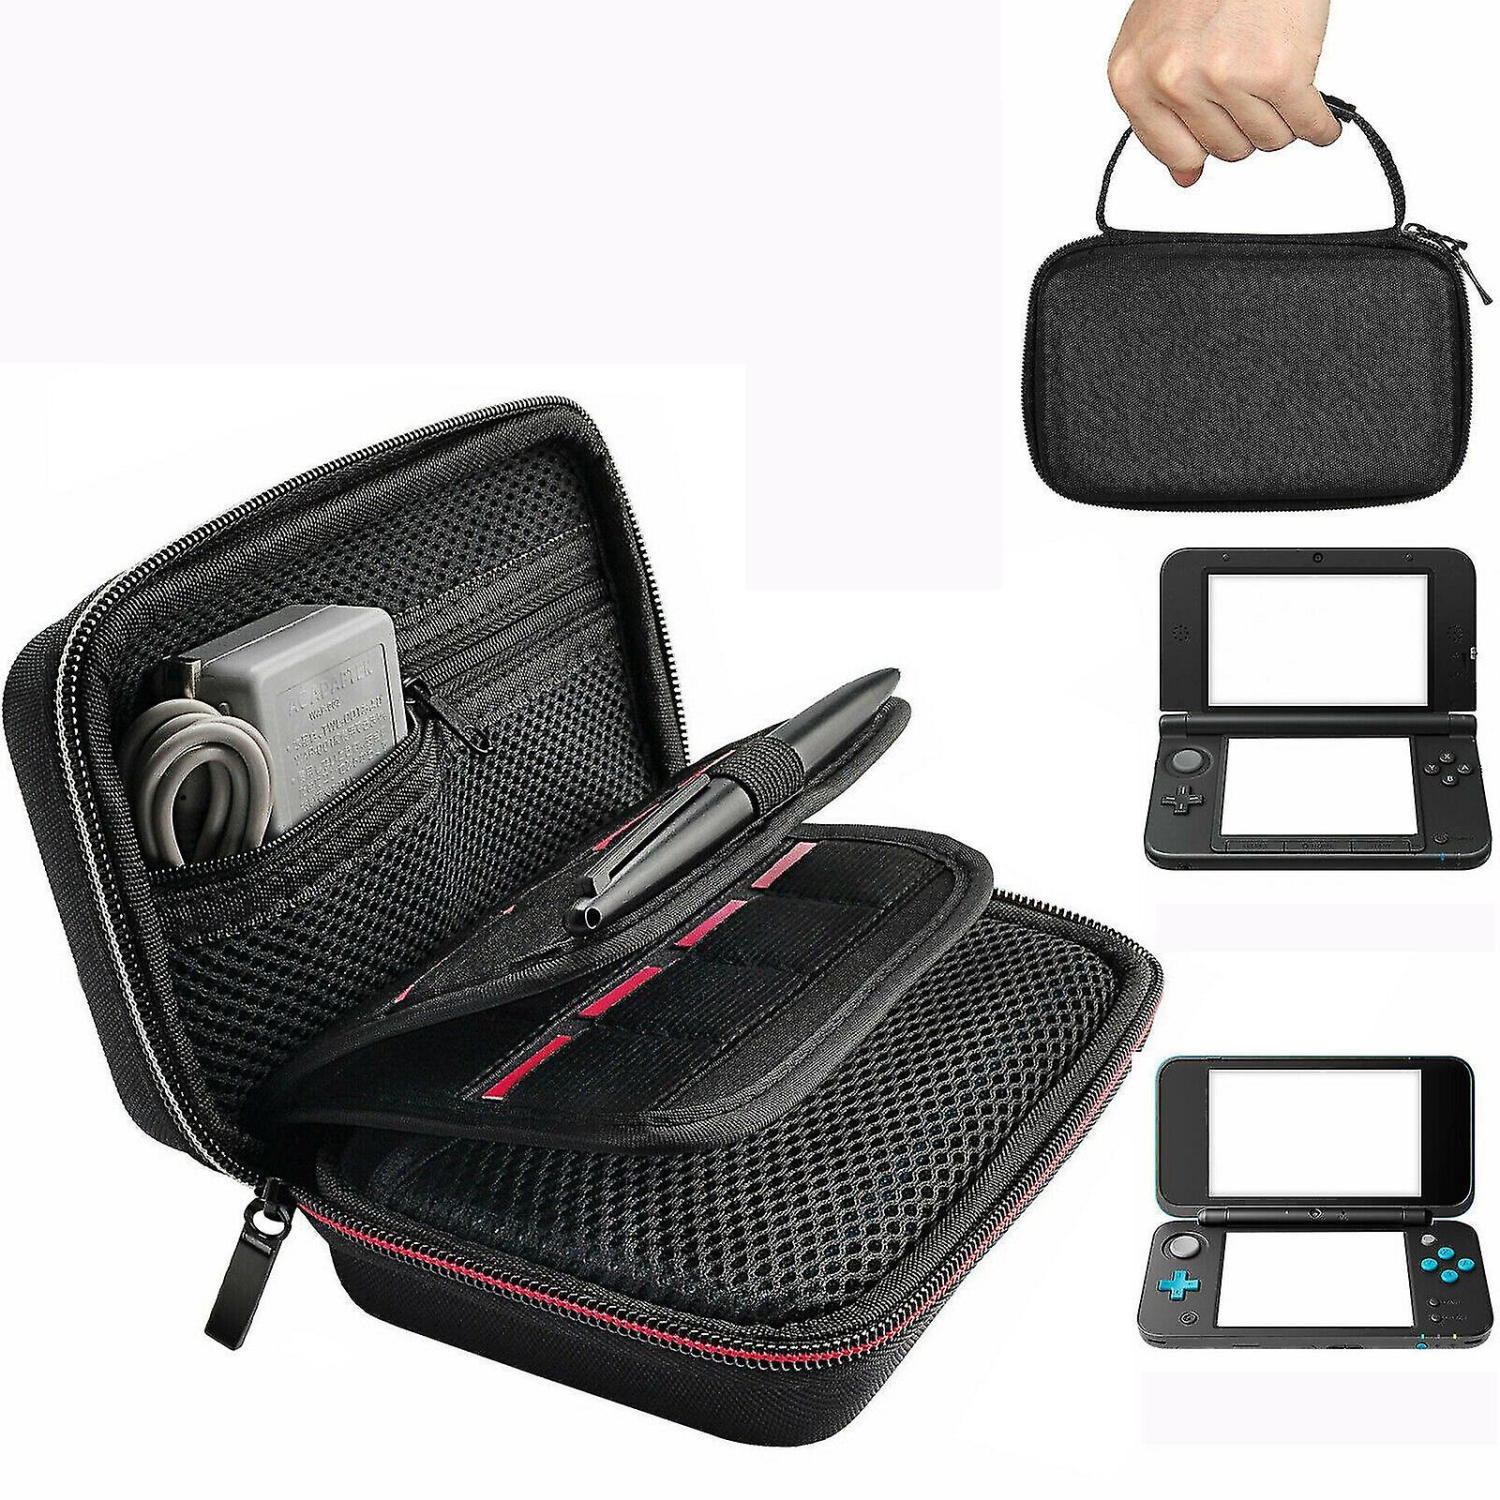 Carrying Case For For Nintendo 3ds Xl/2ds Xl Hard Shell Travel Bag